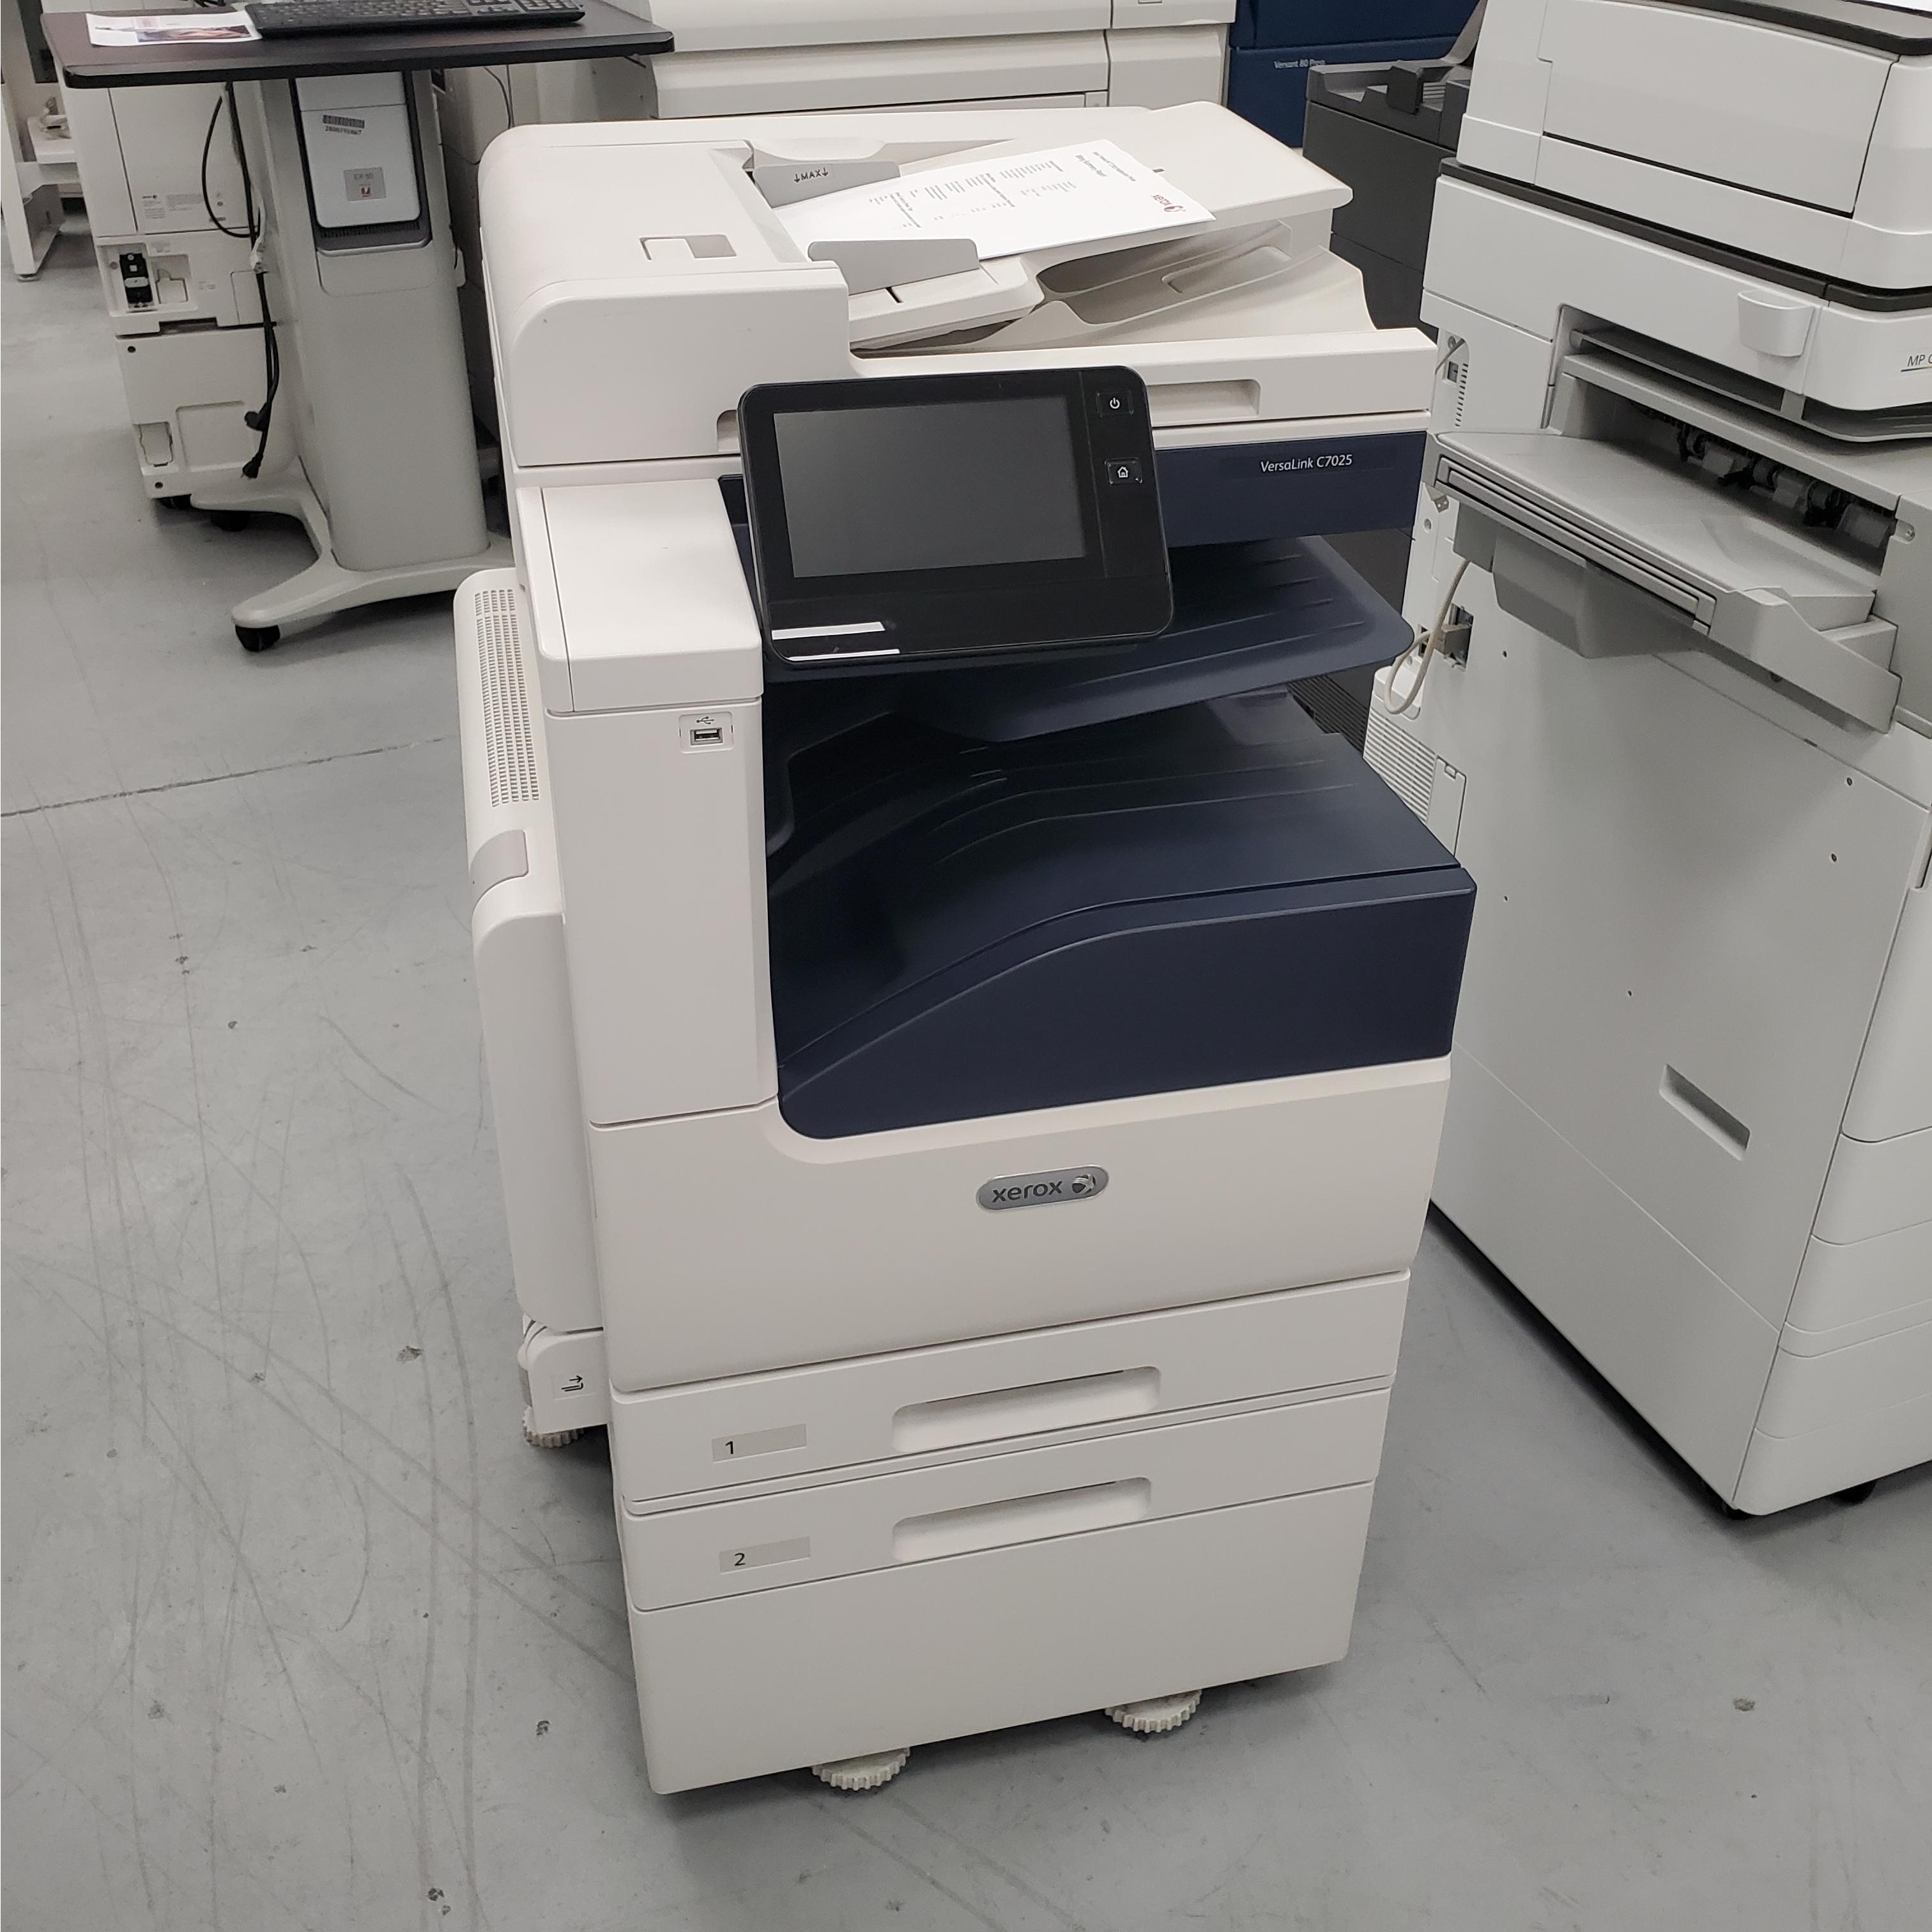 Absolute Toner Xerox Versalink C7025 Color Multifunction Laser Printer With Built On Xerox® ConnectKey Technology For Office- $45/month Office Copiers In Warehouse